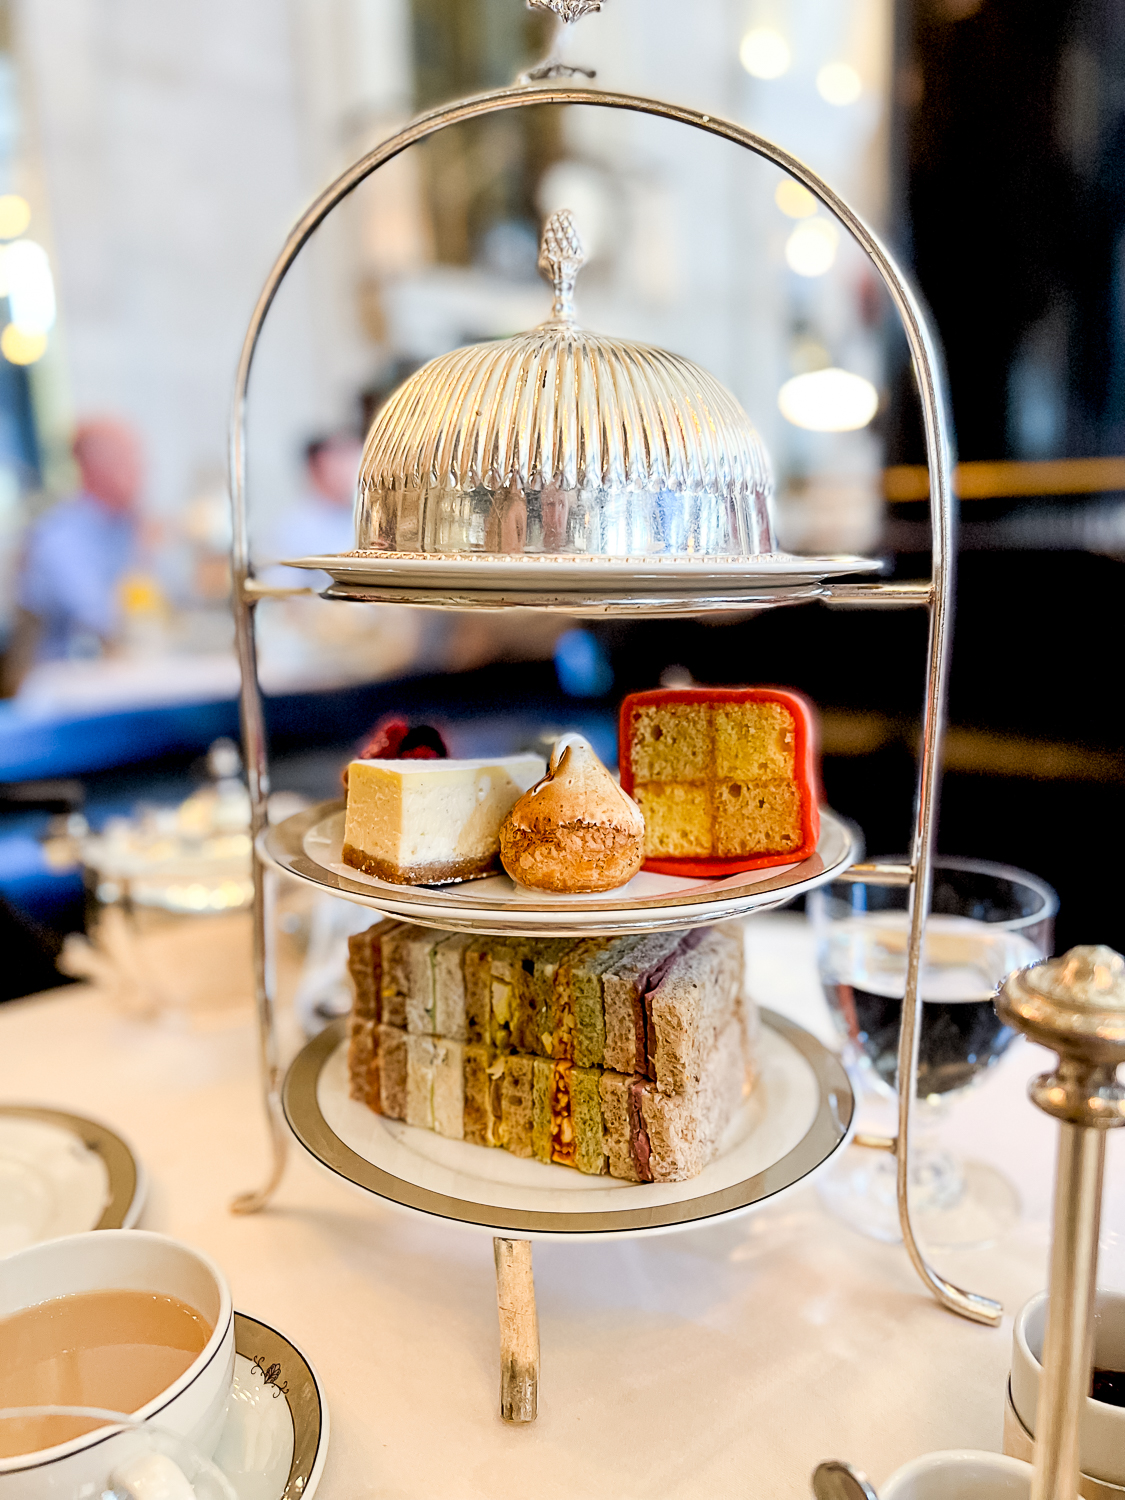 Pacific Globetrotters, budget family travel blog, shares 4 day itinerary in London with kids. Afternoon Tea at The Wolseley